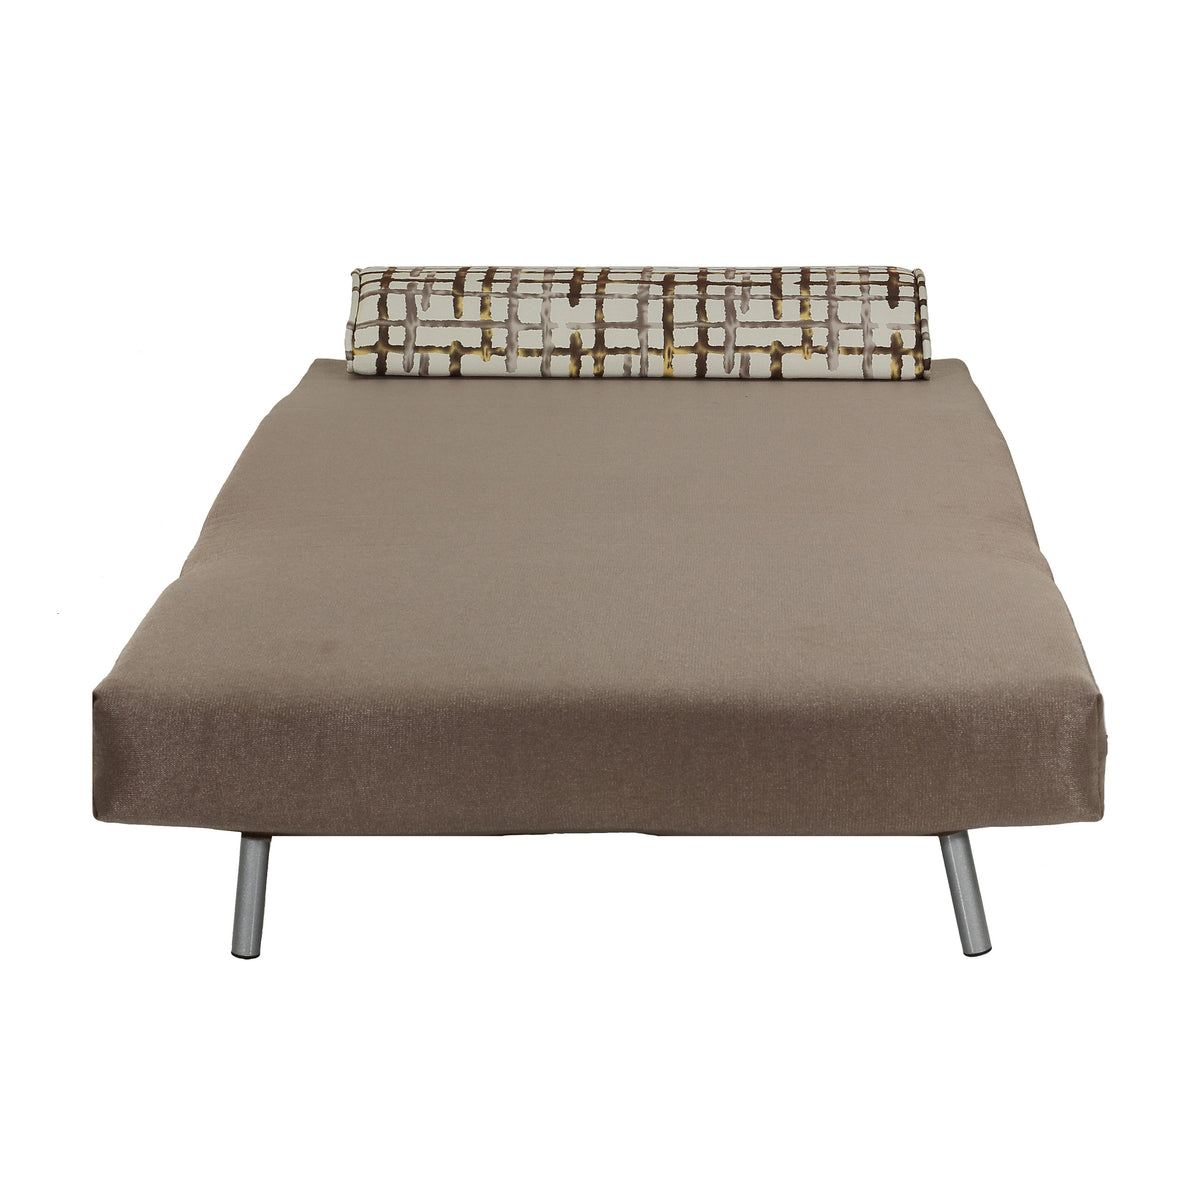 Cortesi Home Savion Taupe Convertible Accent Chair Bed